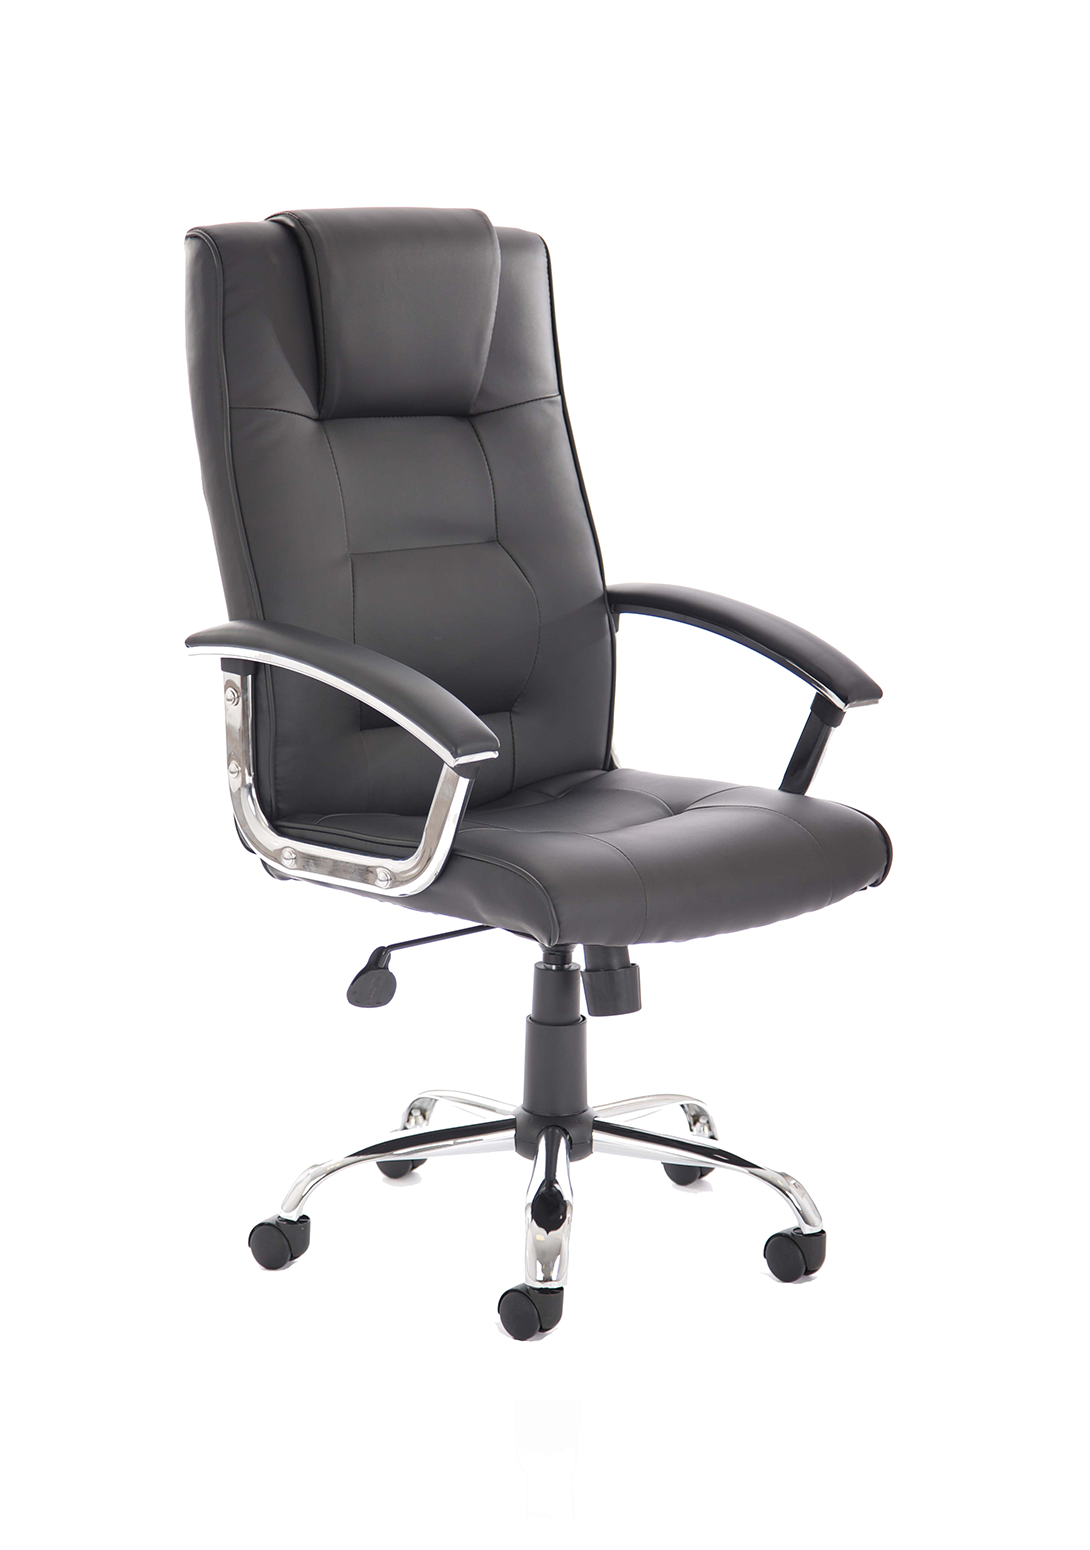 Thrift Exec Home Office Chair | Executive Chair | Home Office Furniture | Leather Executive Chair | Leather Swivel Chair | Swivel Chair